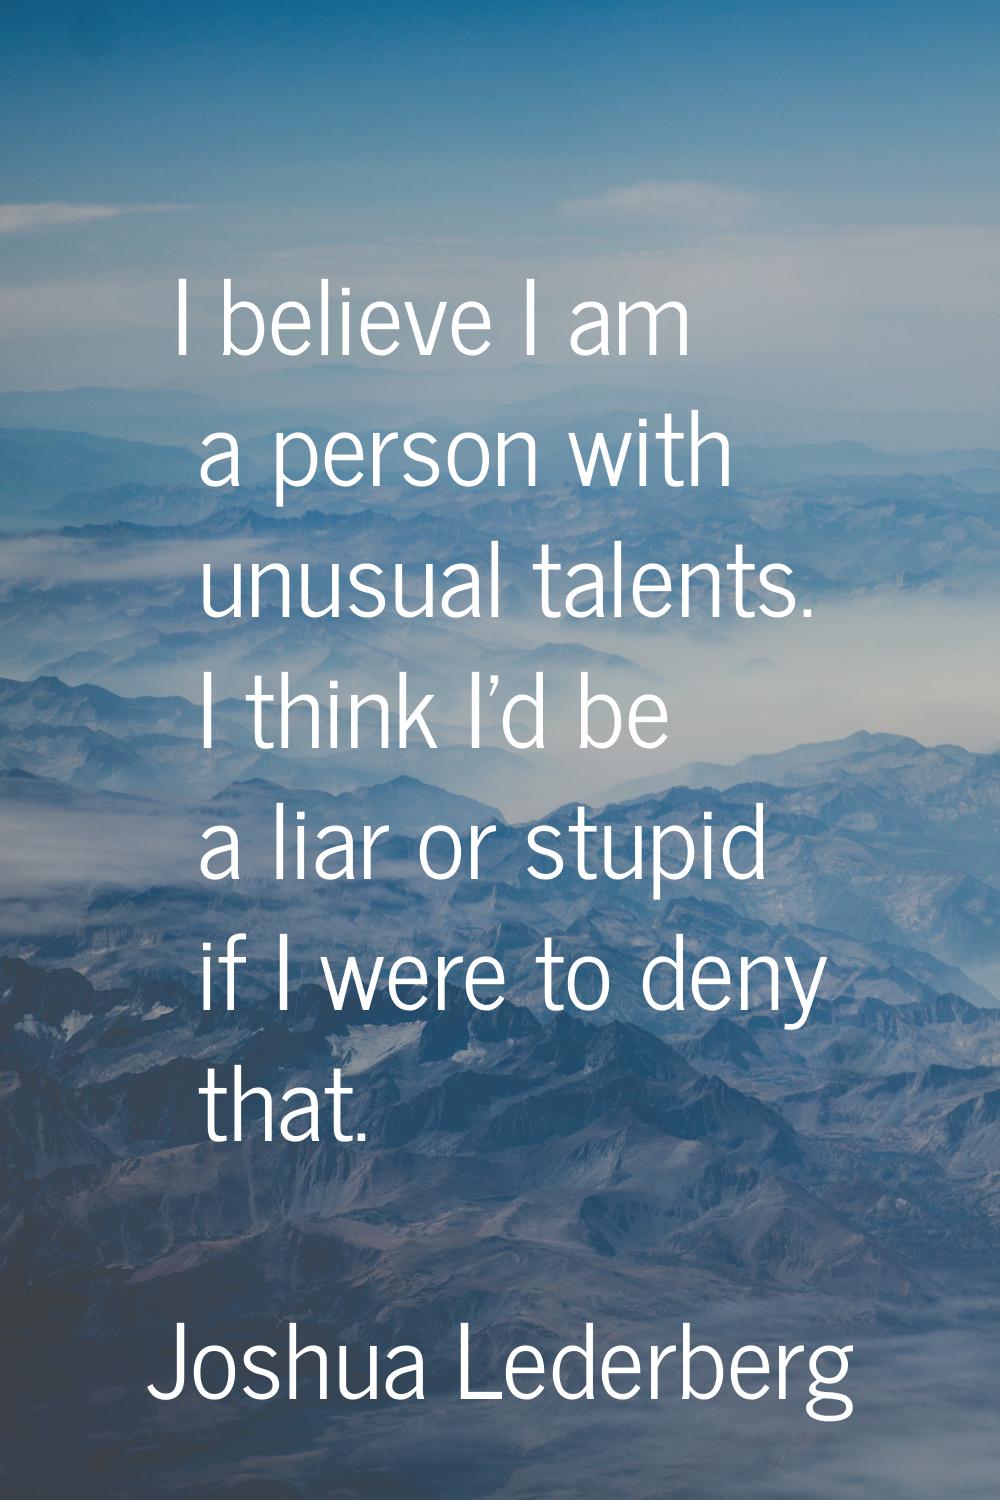 I believe I am a person with unusual talents. I think I'd be a liar or stupid if I were to deny tha